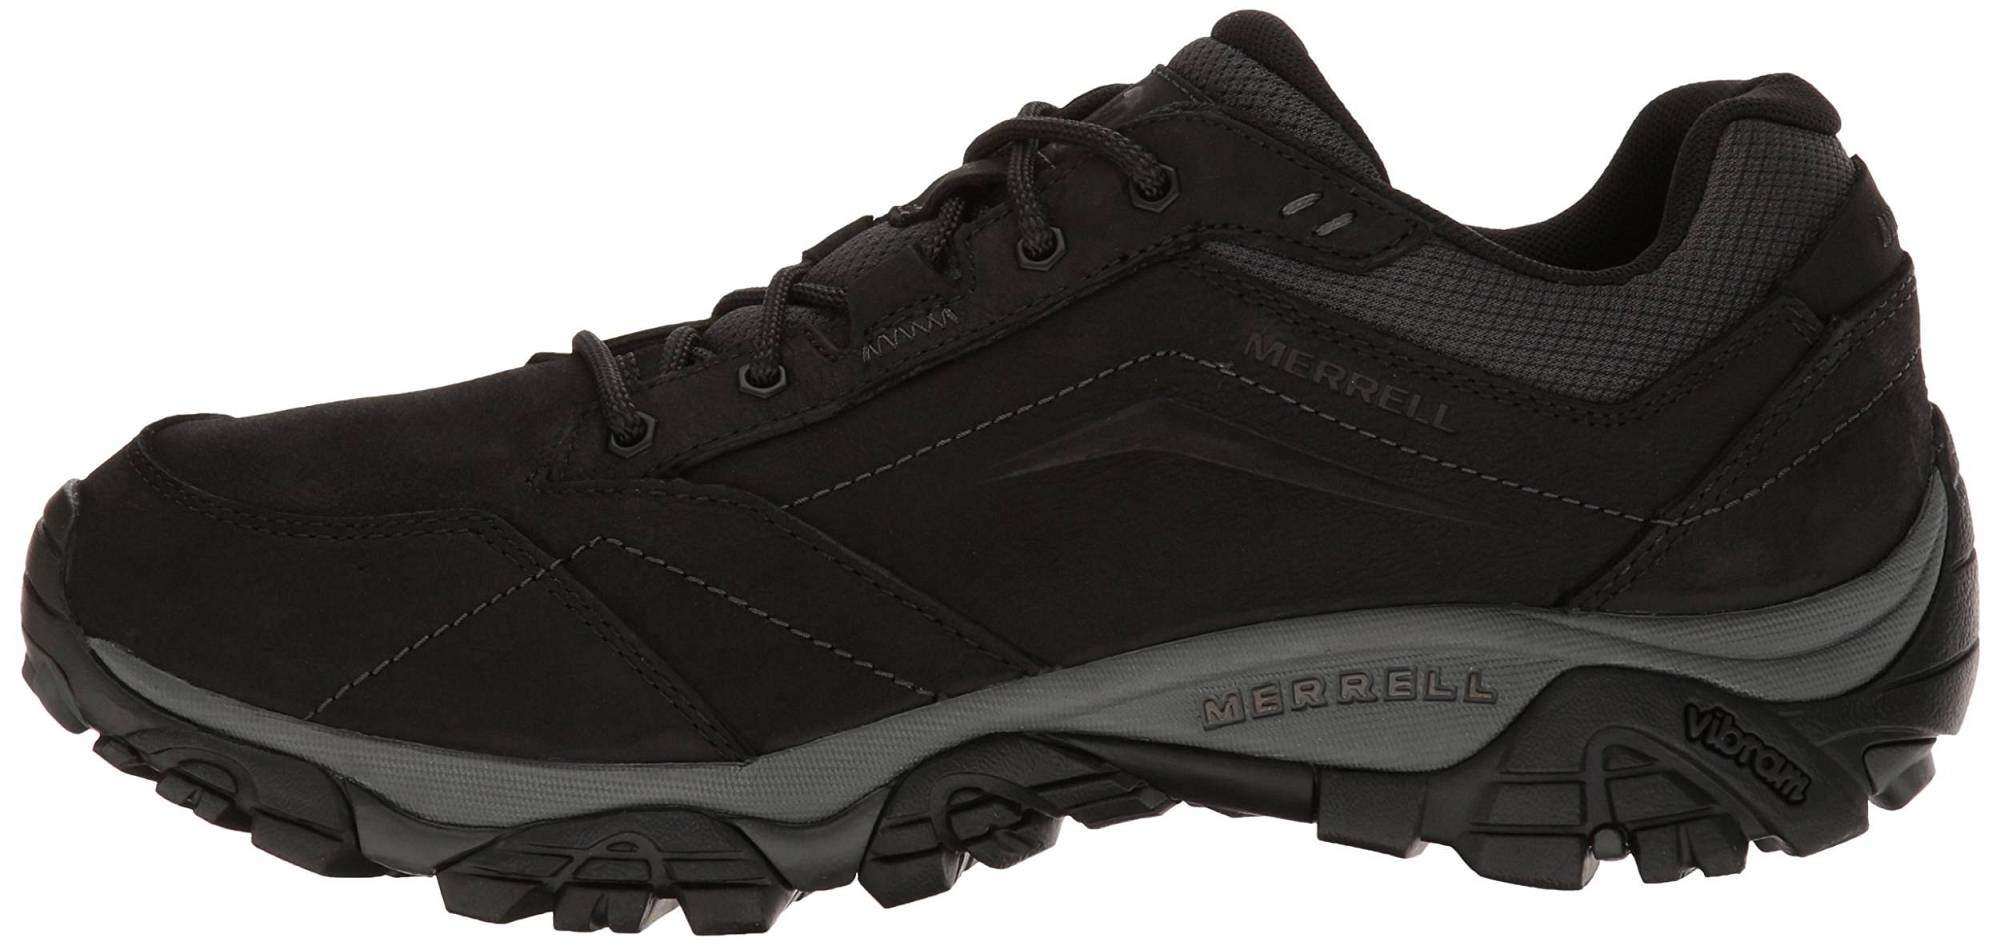 Merrell Moab Adventure Lace – Shoes Reviews & Reasons To Buy